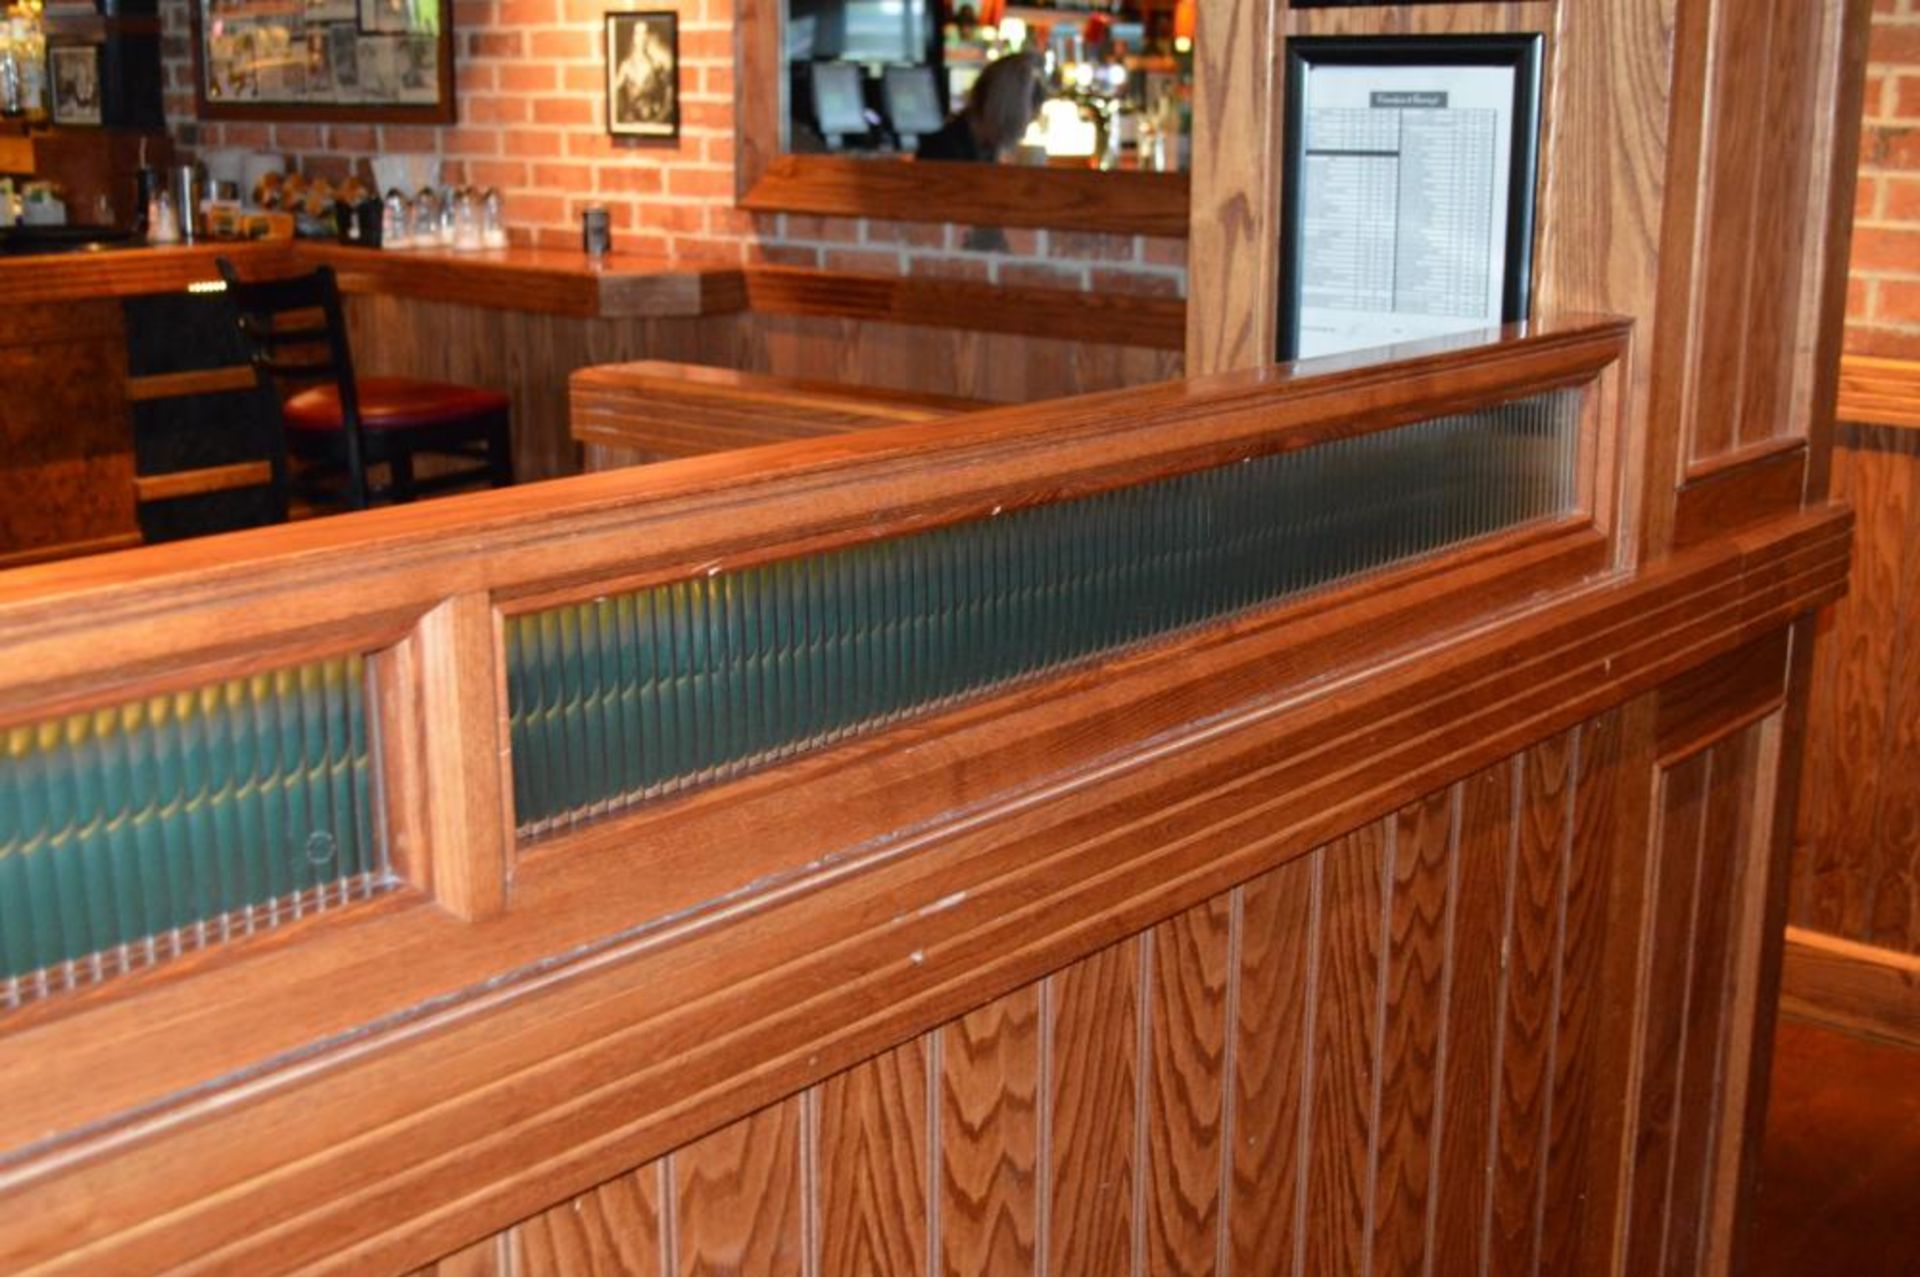 1 x Bar Restaurant Room Partition With Seating Bench, Pillar, Wine Cabinet and Foot Rest - Overall S - Image 15 of 21